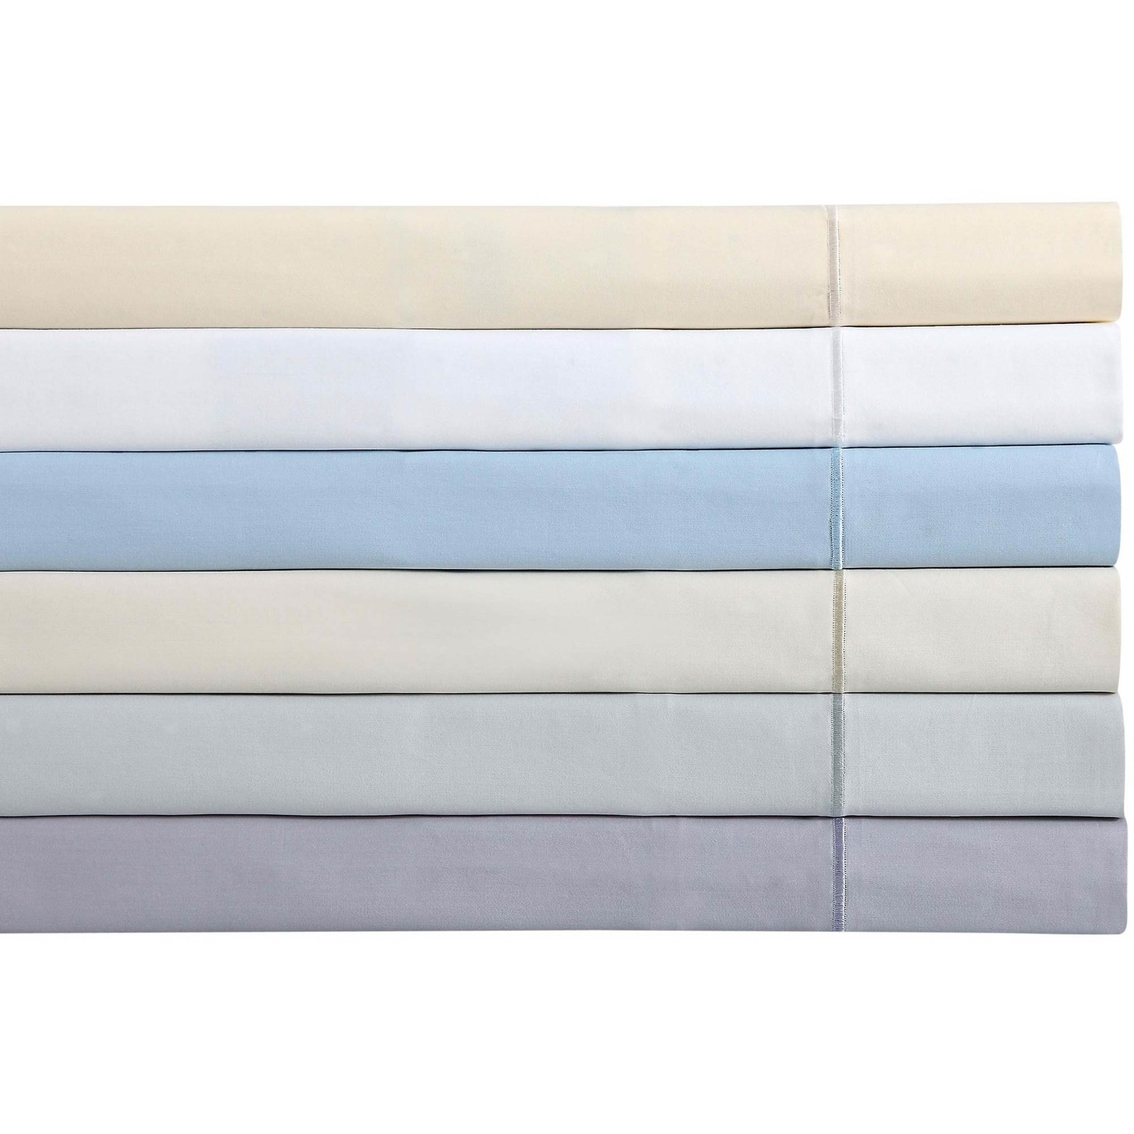 Charisma Home 310 Thread Count Classic Solid Cotton Sateen Pillowcase 2 pk. - Image 3 of 3